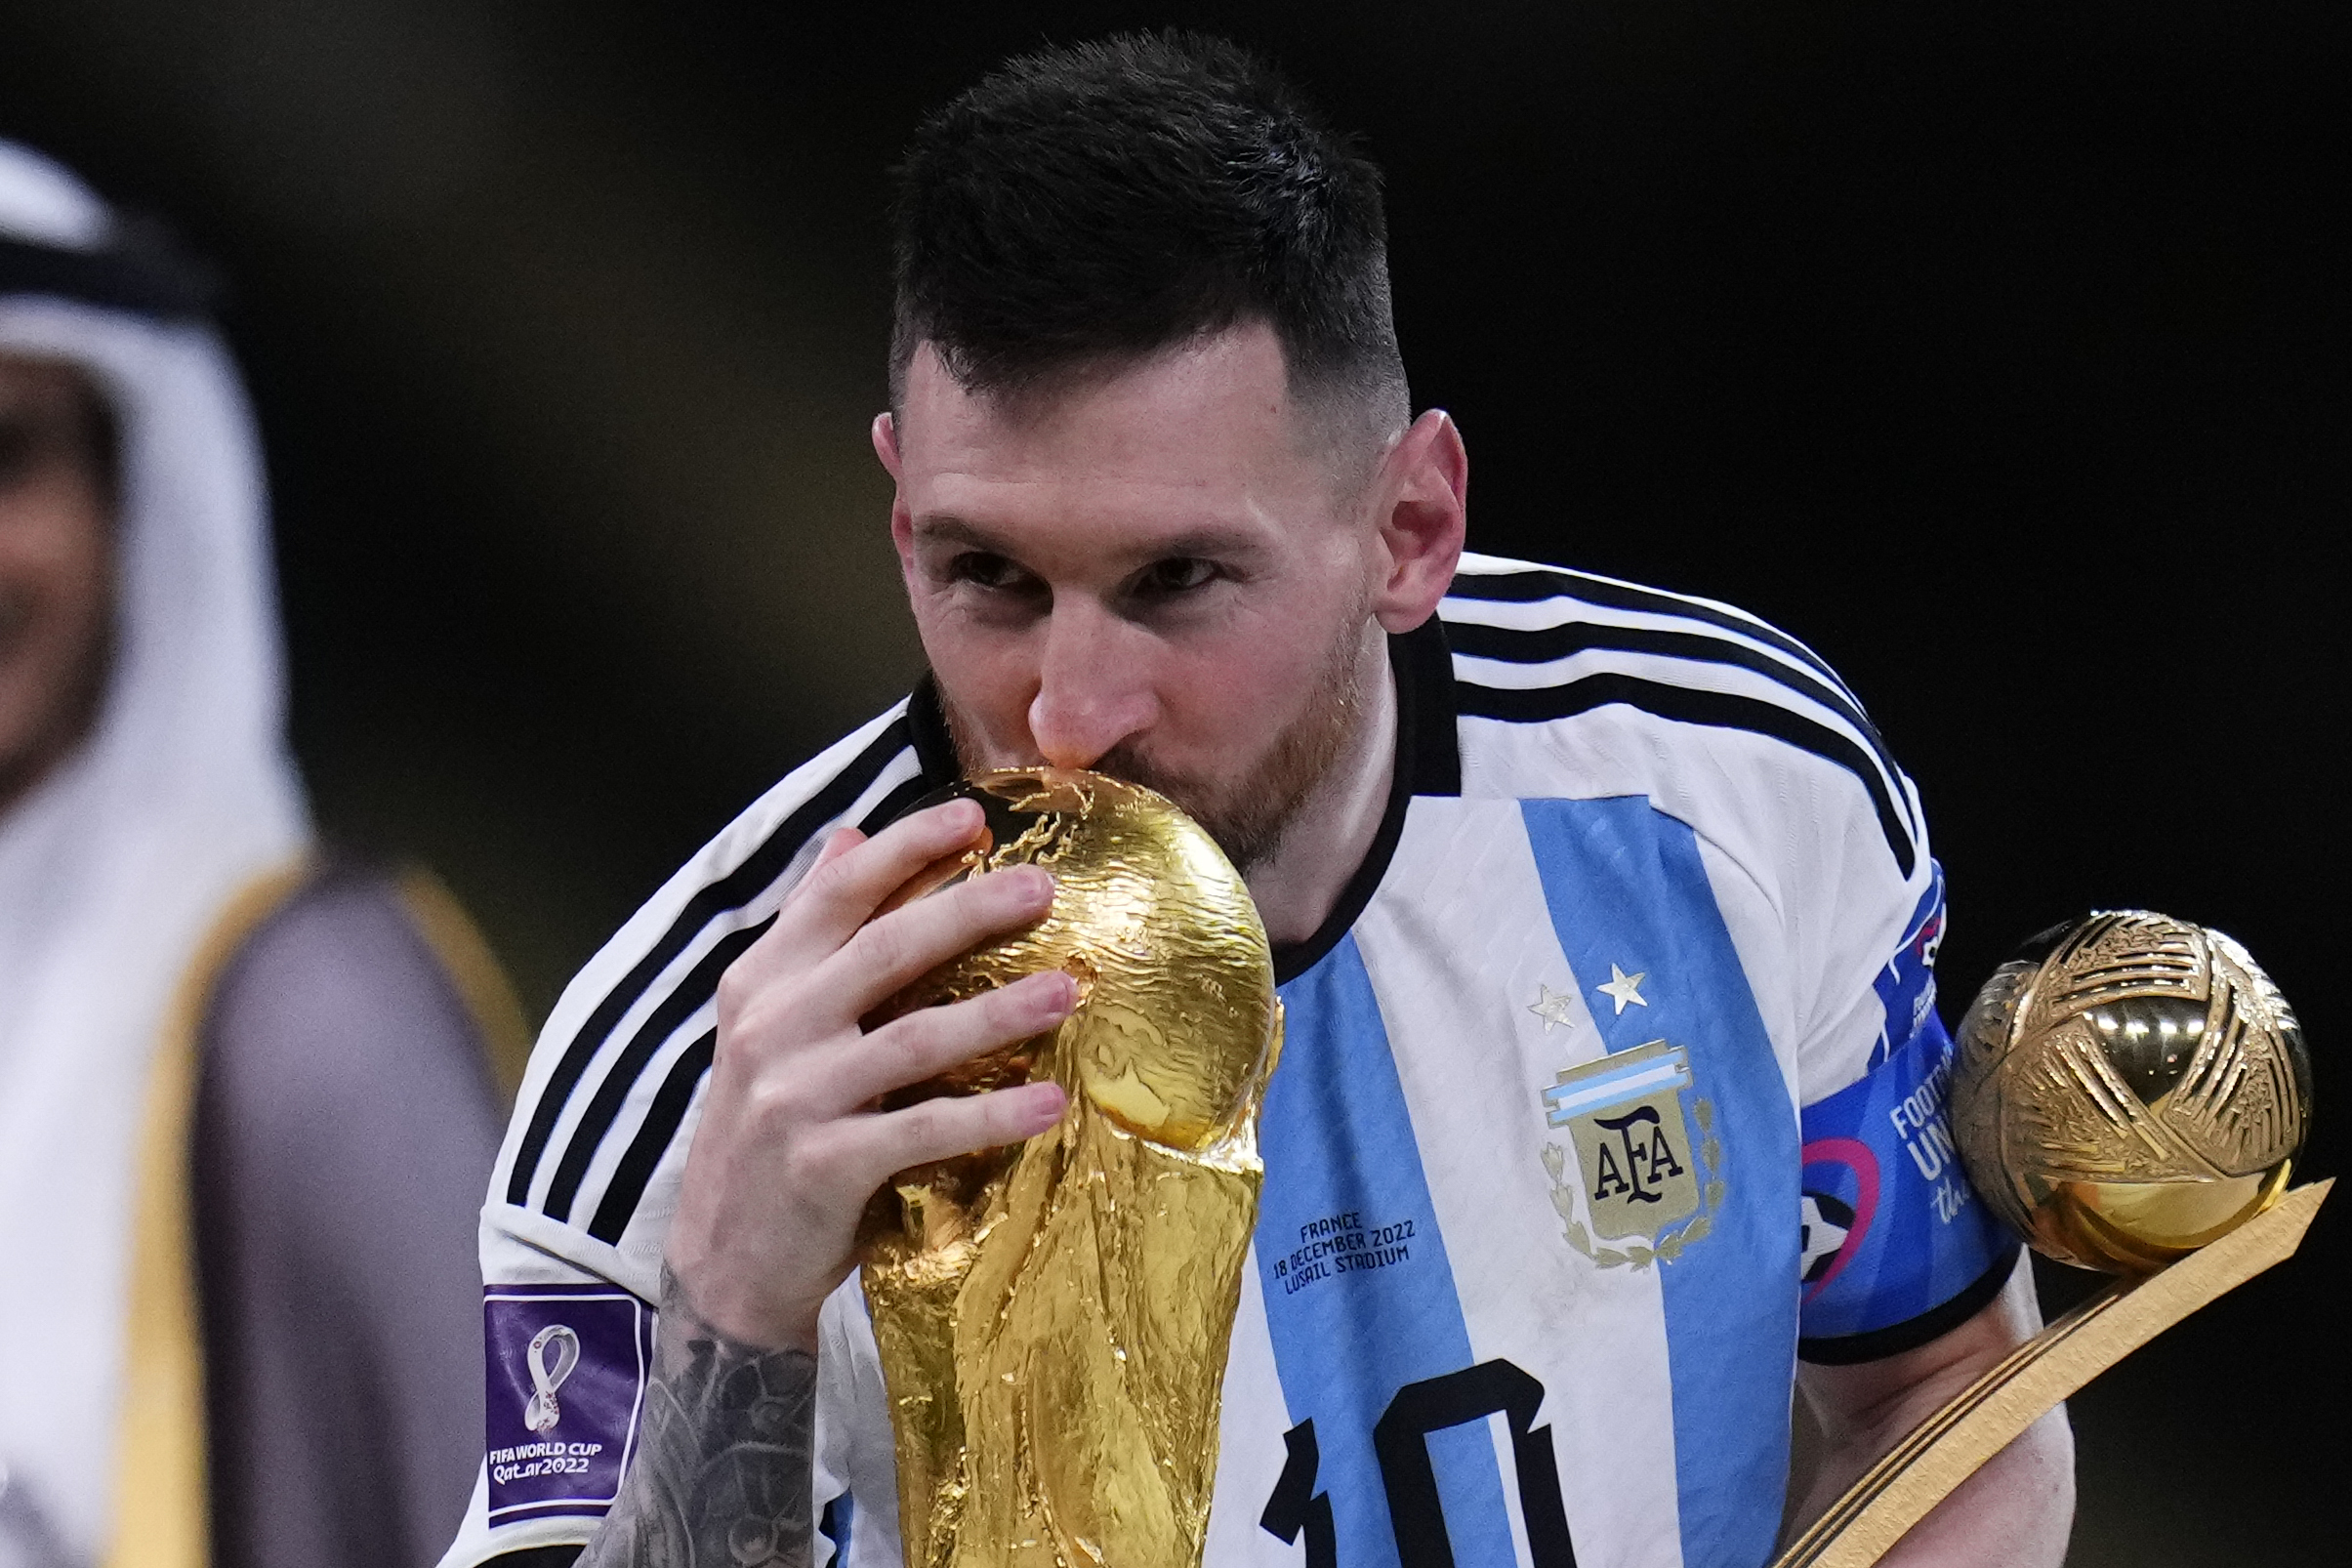 Lionel Messi: What next for arguably the greatest player in history?